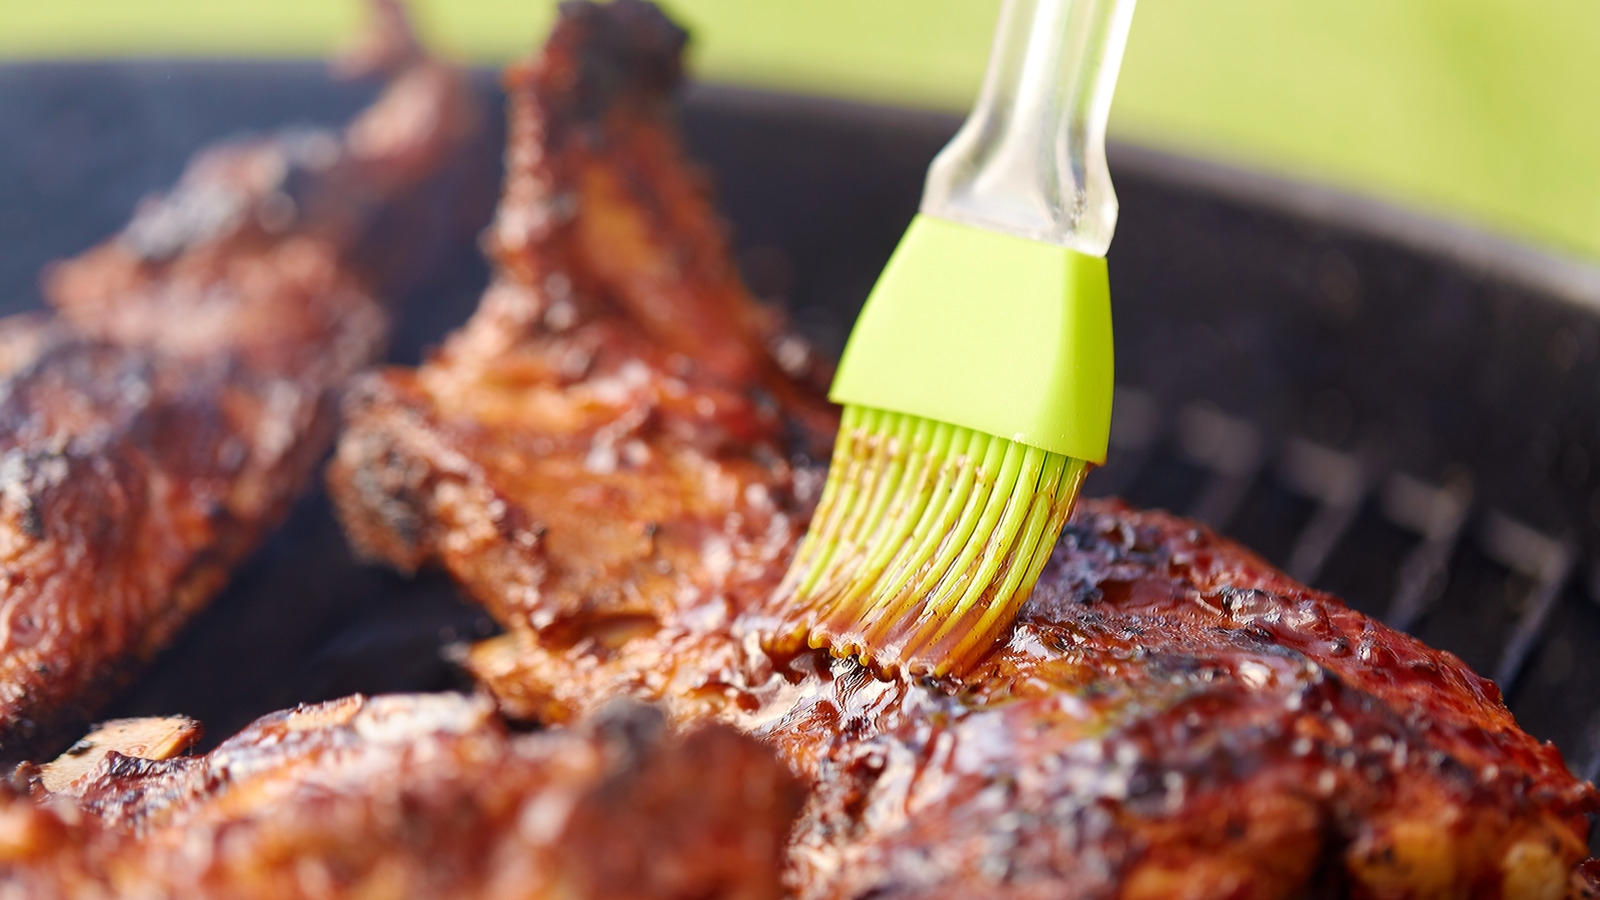 Is A Bulb Better For Basting Than A Brush?